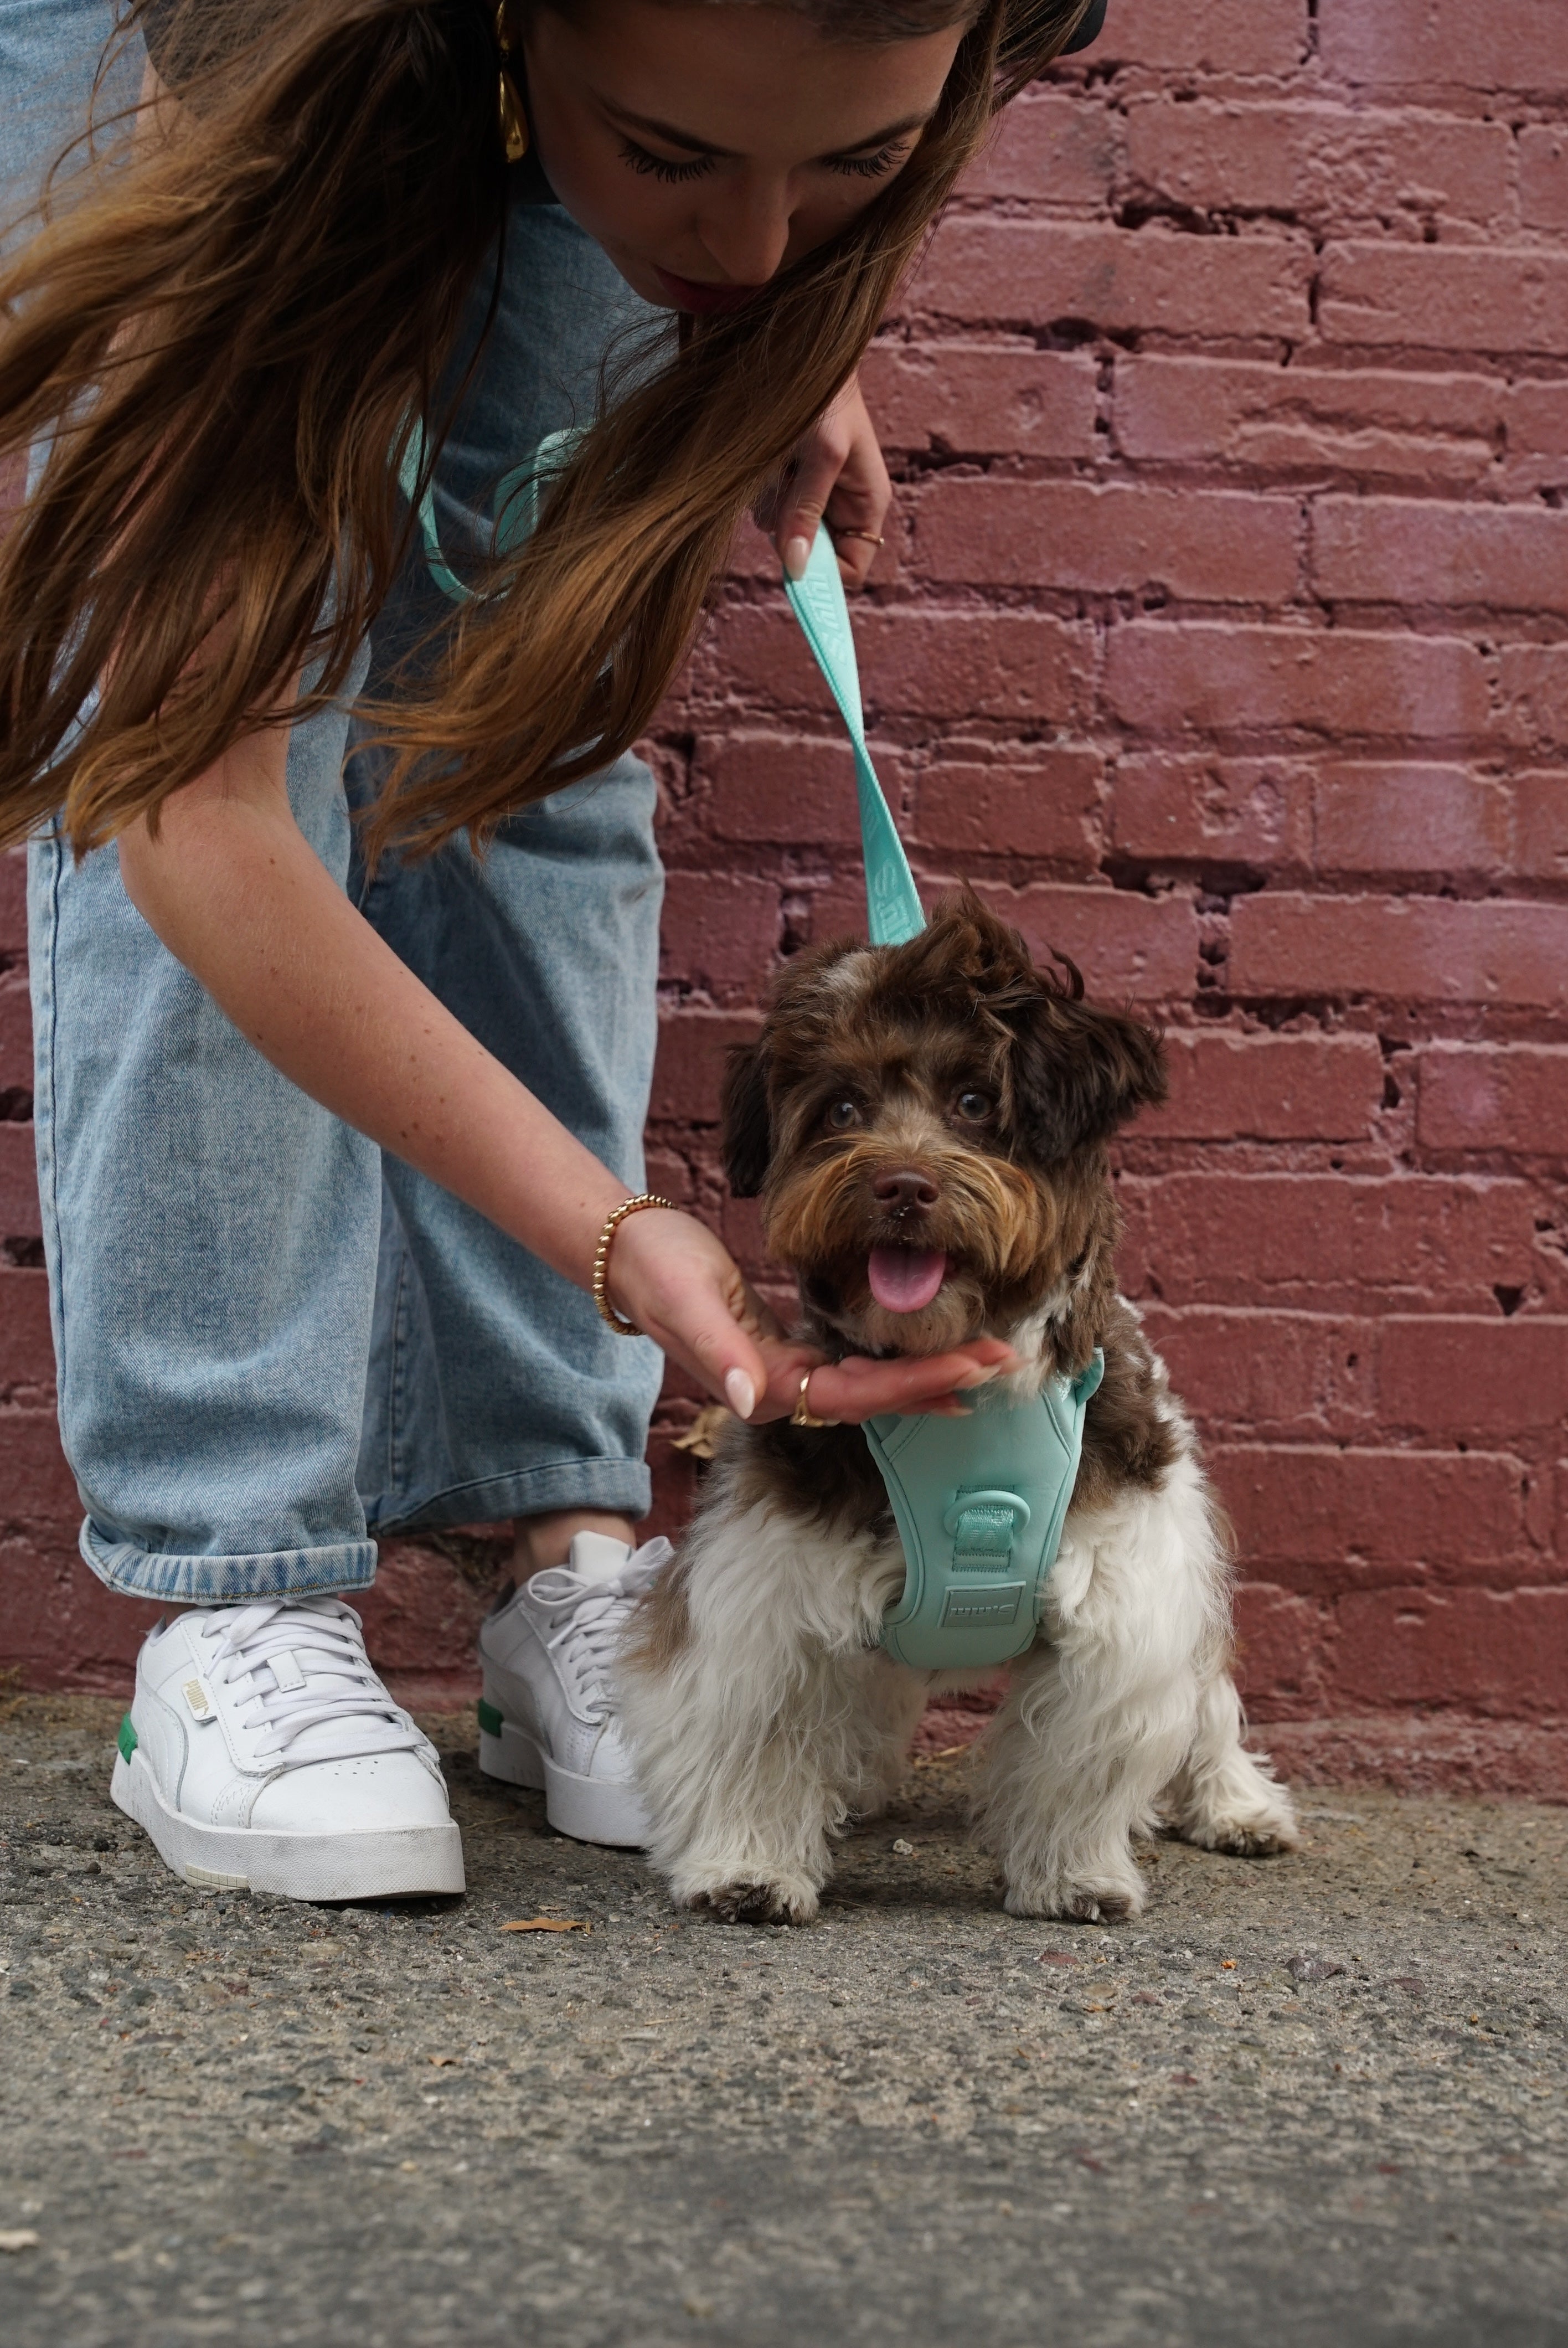  fluffy dog with a curly brown and white coat, wearing a Cali Blue harness. The dog is standing on a concrete sidewalk in front of a red brick wall. A person, wearing light blue jeans and white sneakers, is bending down to pet the dog. The person is holding the matching Cali Blue leash and gently touching the dog's chin. The dog appears happy with its tongue out and is looking directly at the camera. The overall scene conveys a sense of affection and companionship between the person and the dog